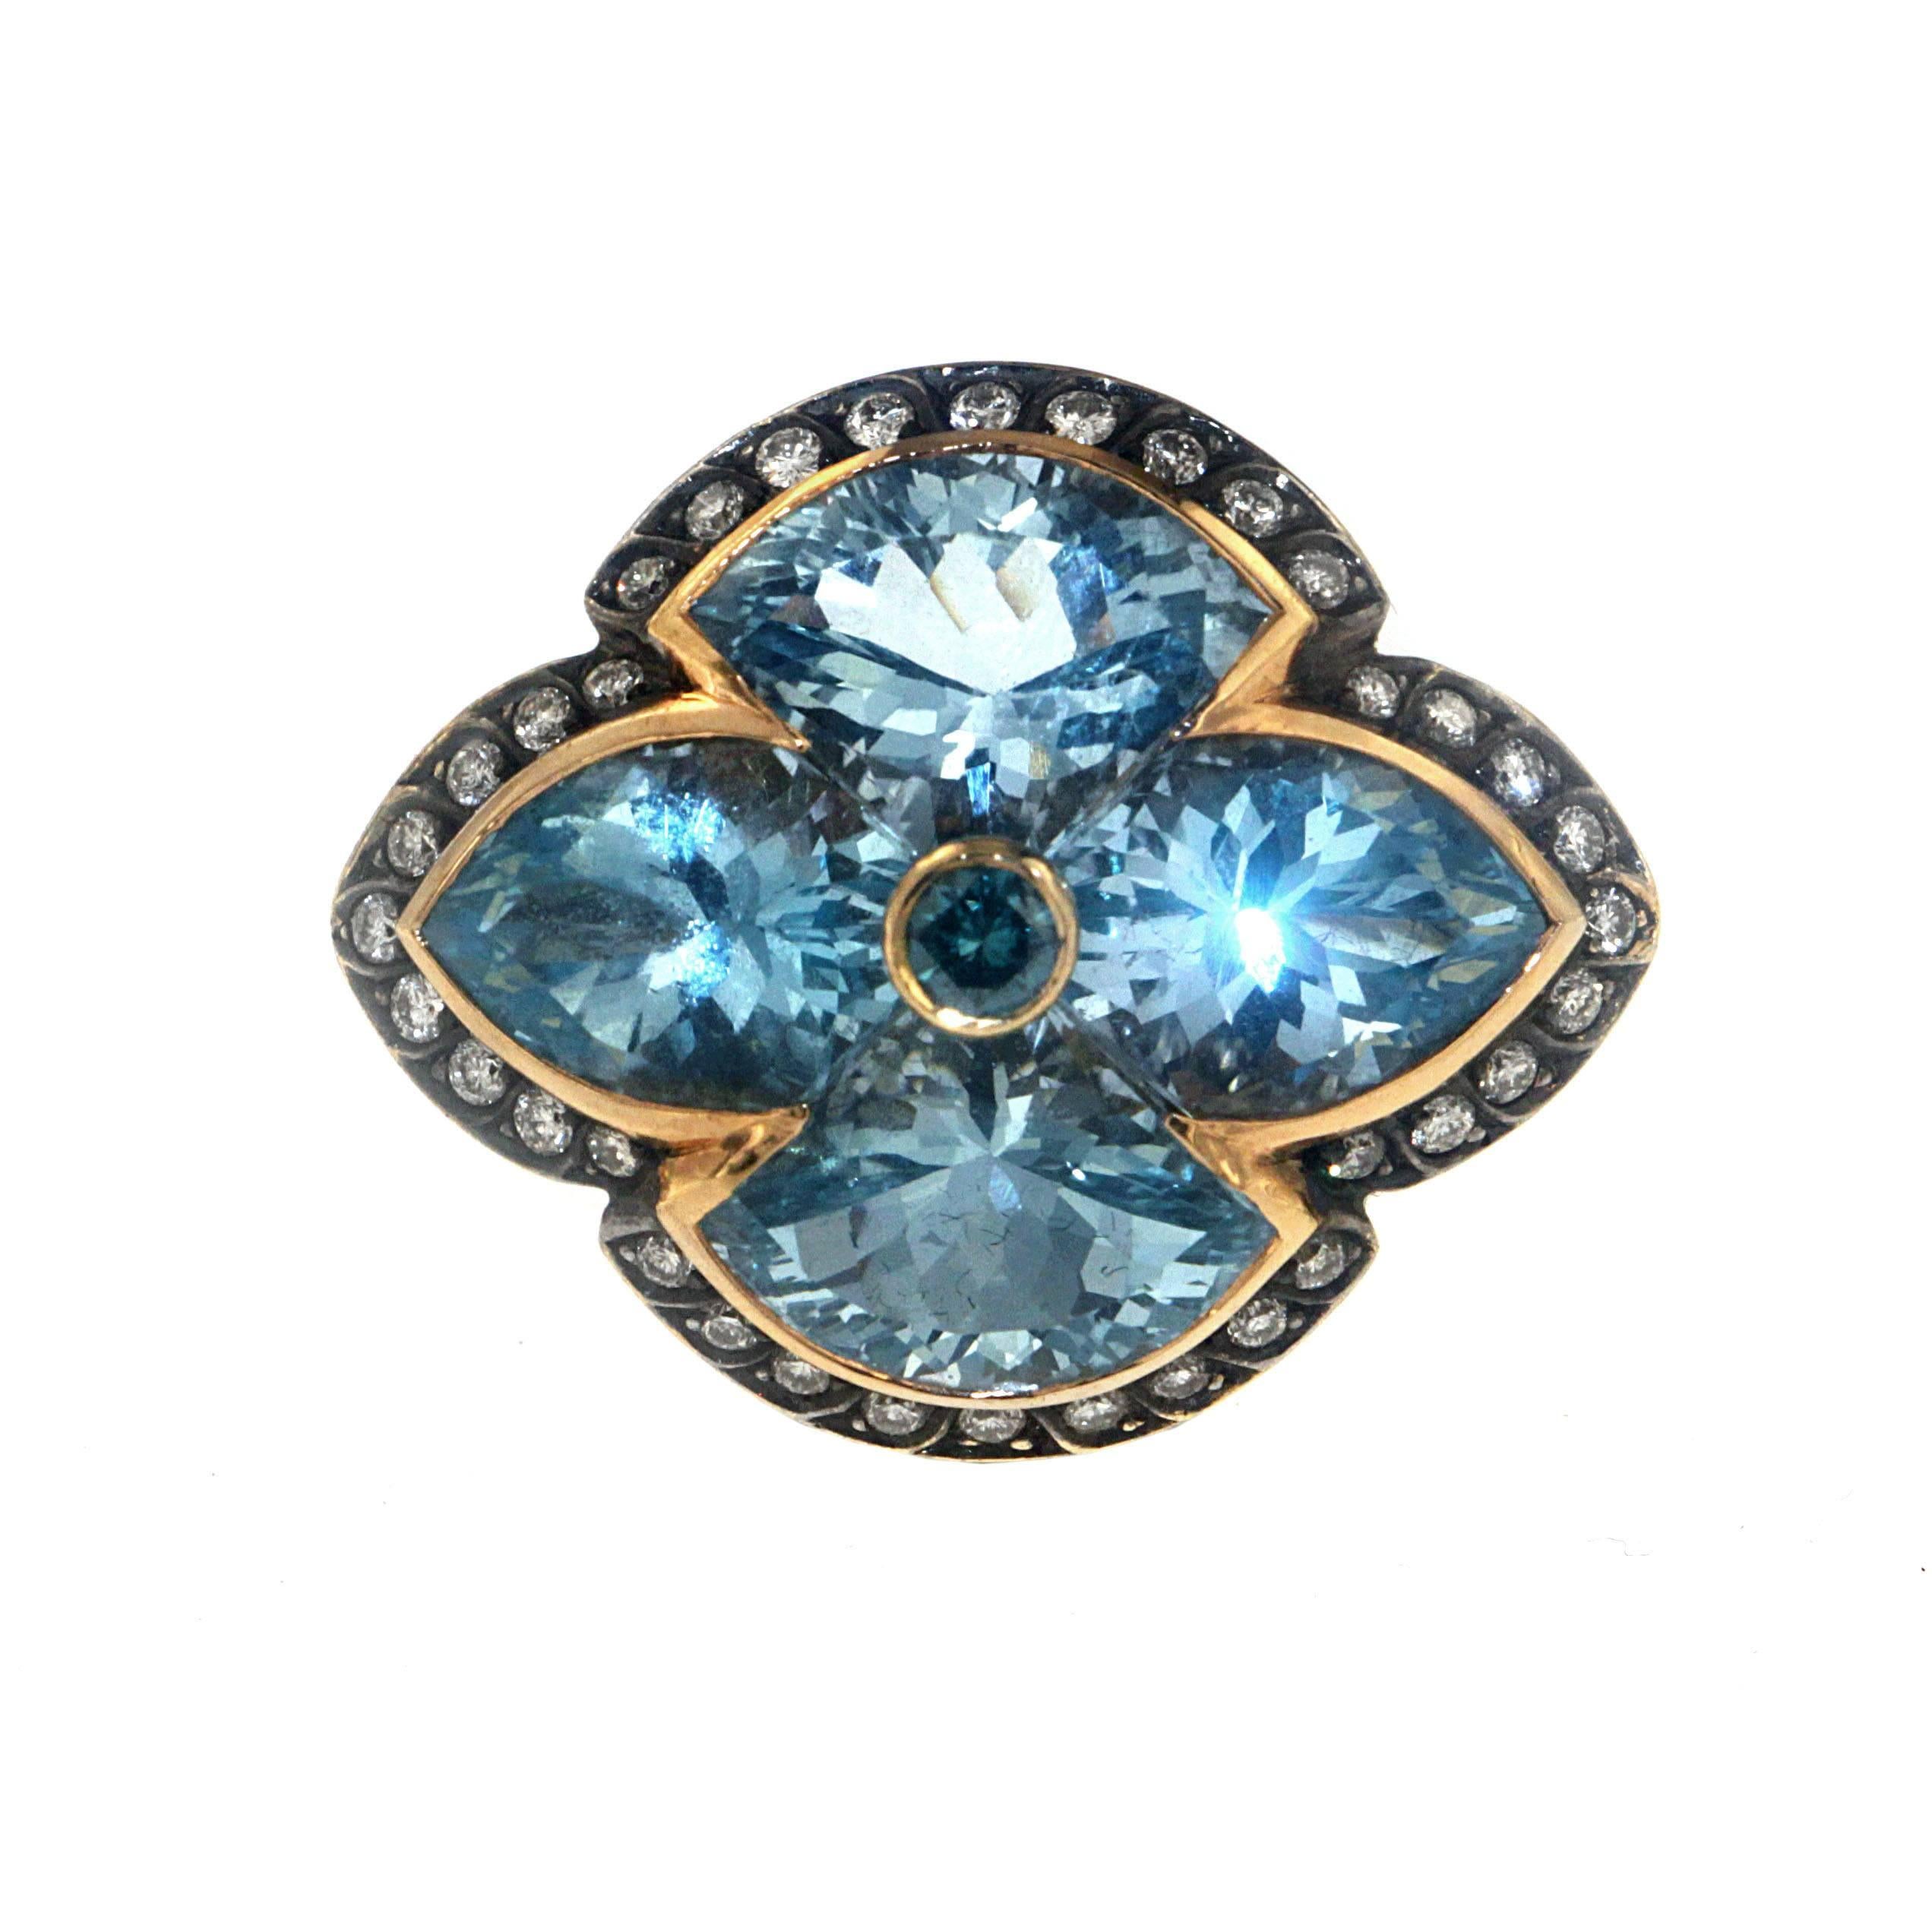 This stately Zorab Creation original features 4 Blue Topaz center stones totaling 19.60 carats. Surrounded by 5.23 carats of Blue Sapphire and 0.62 carats of White Diamonds, this stunning 18 Karat Gold cocktail ring stands in a class by itself.